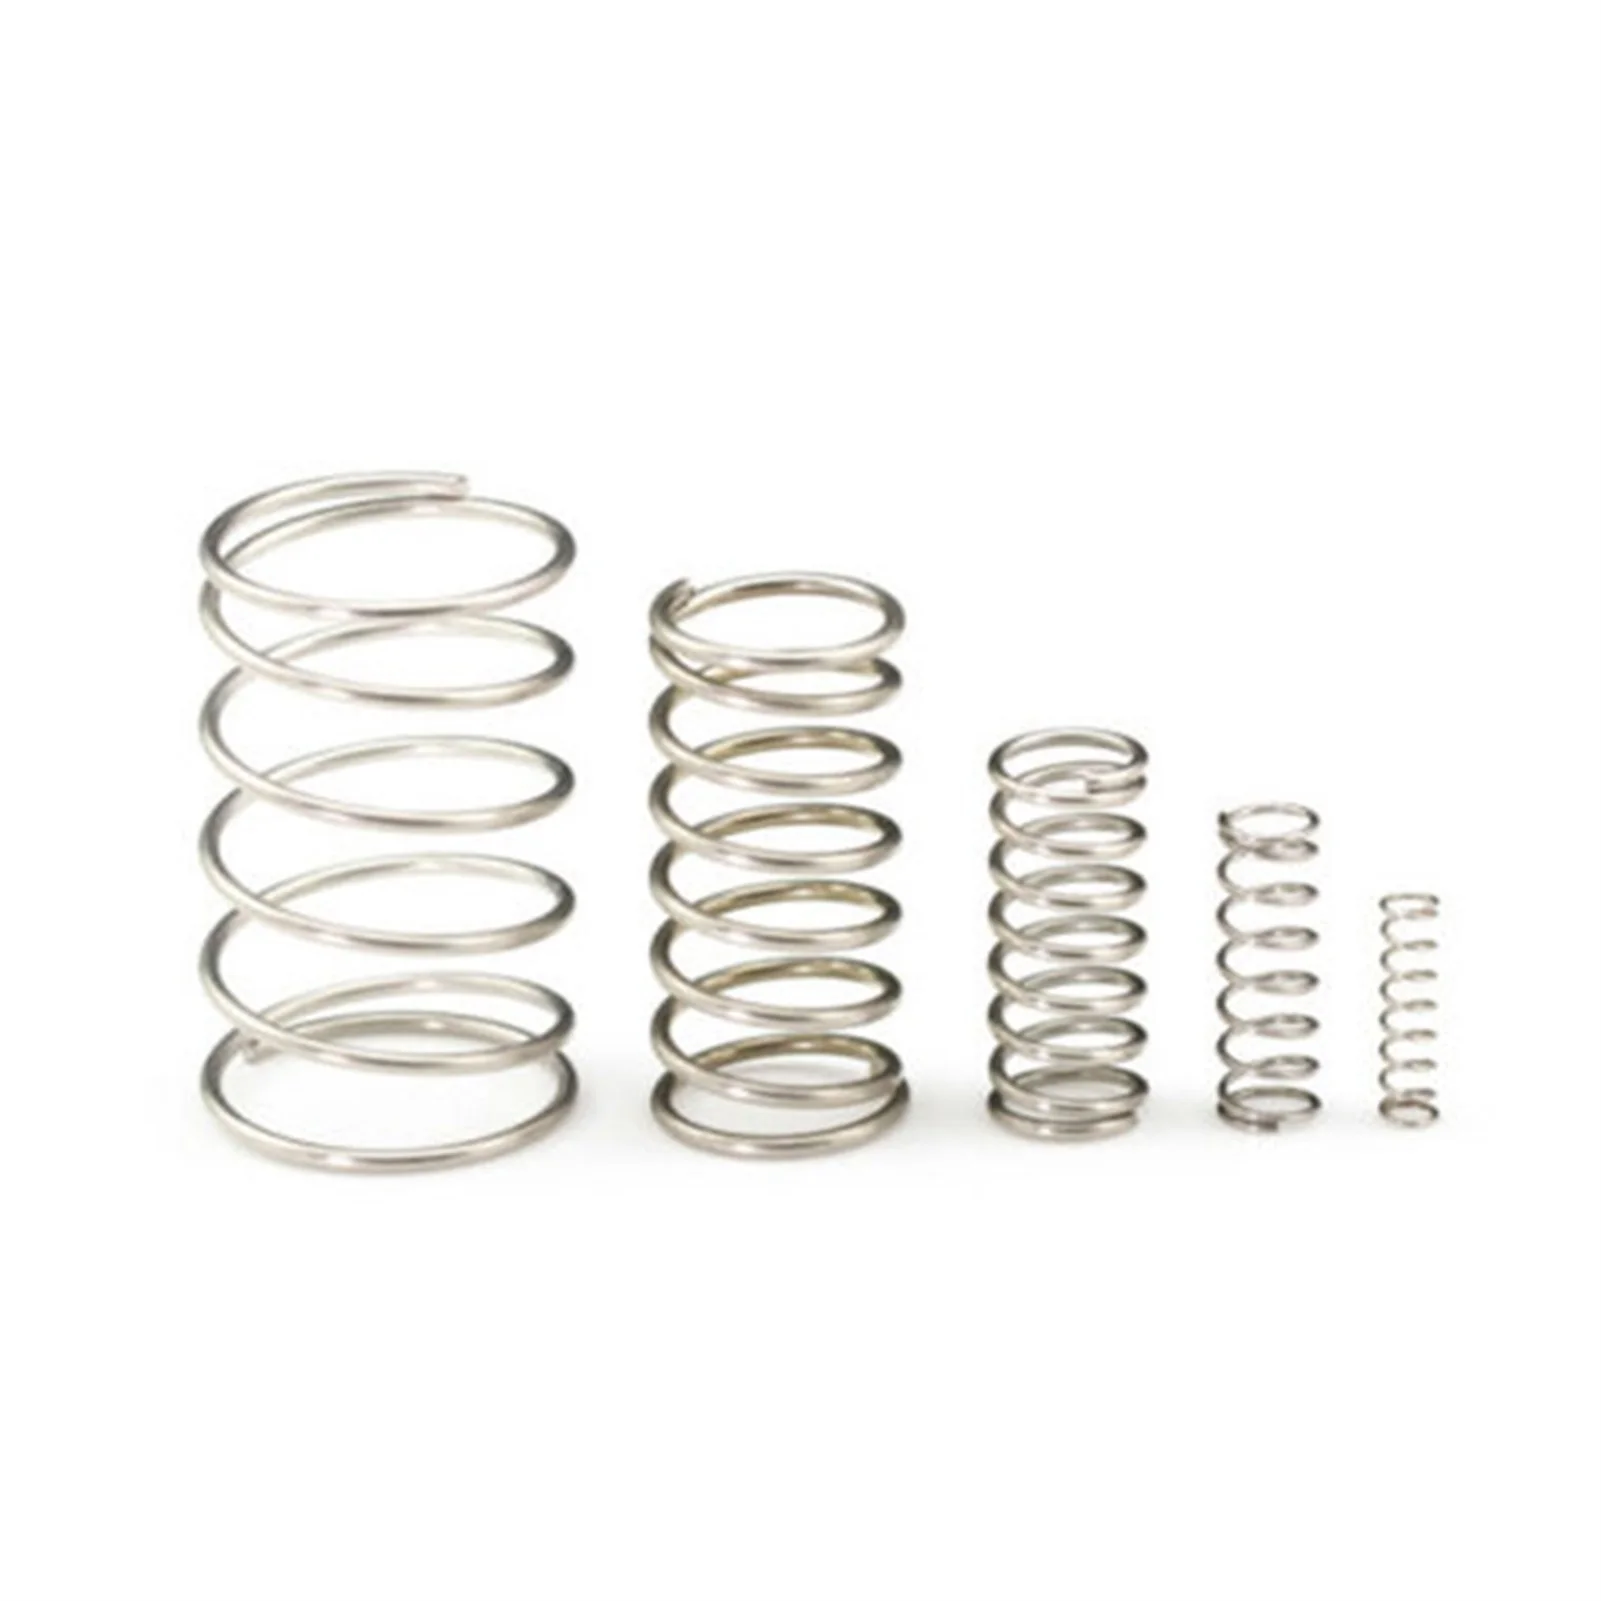 

10Pcs, Compression Spring, Steel Non-corrosive Tension Spring Wire Dia 0.6mm Outer Dia 6mm Length 5-50mm